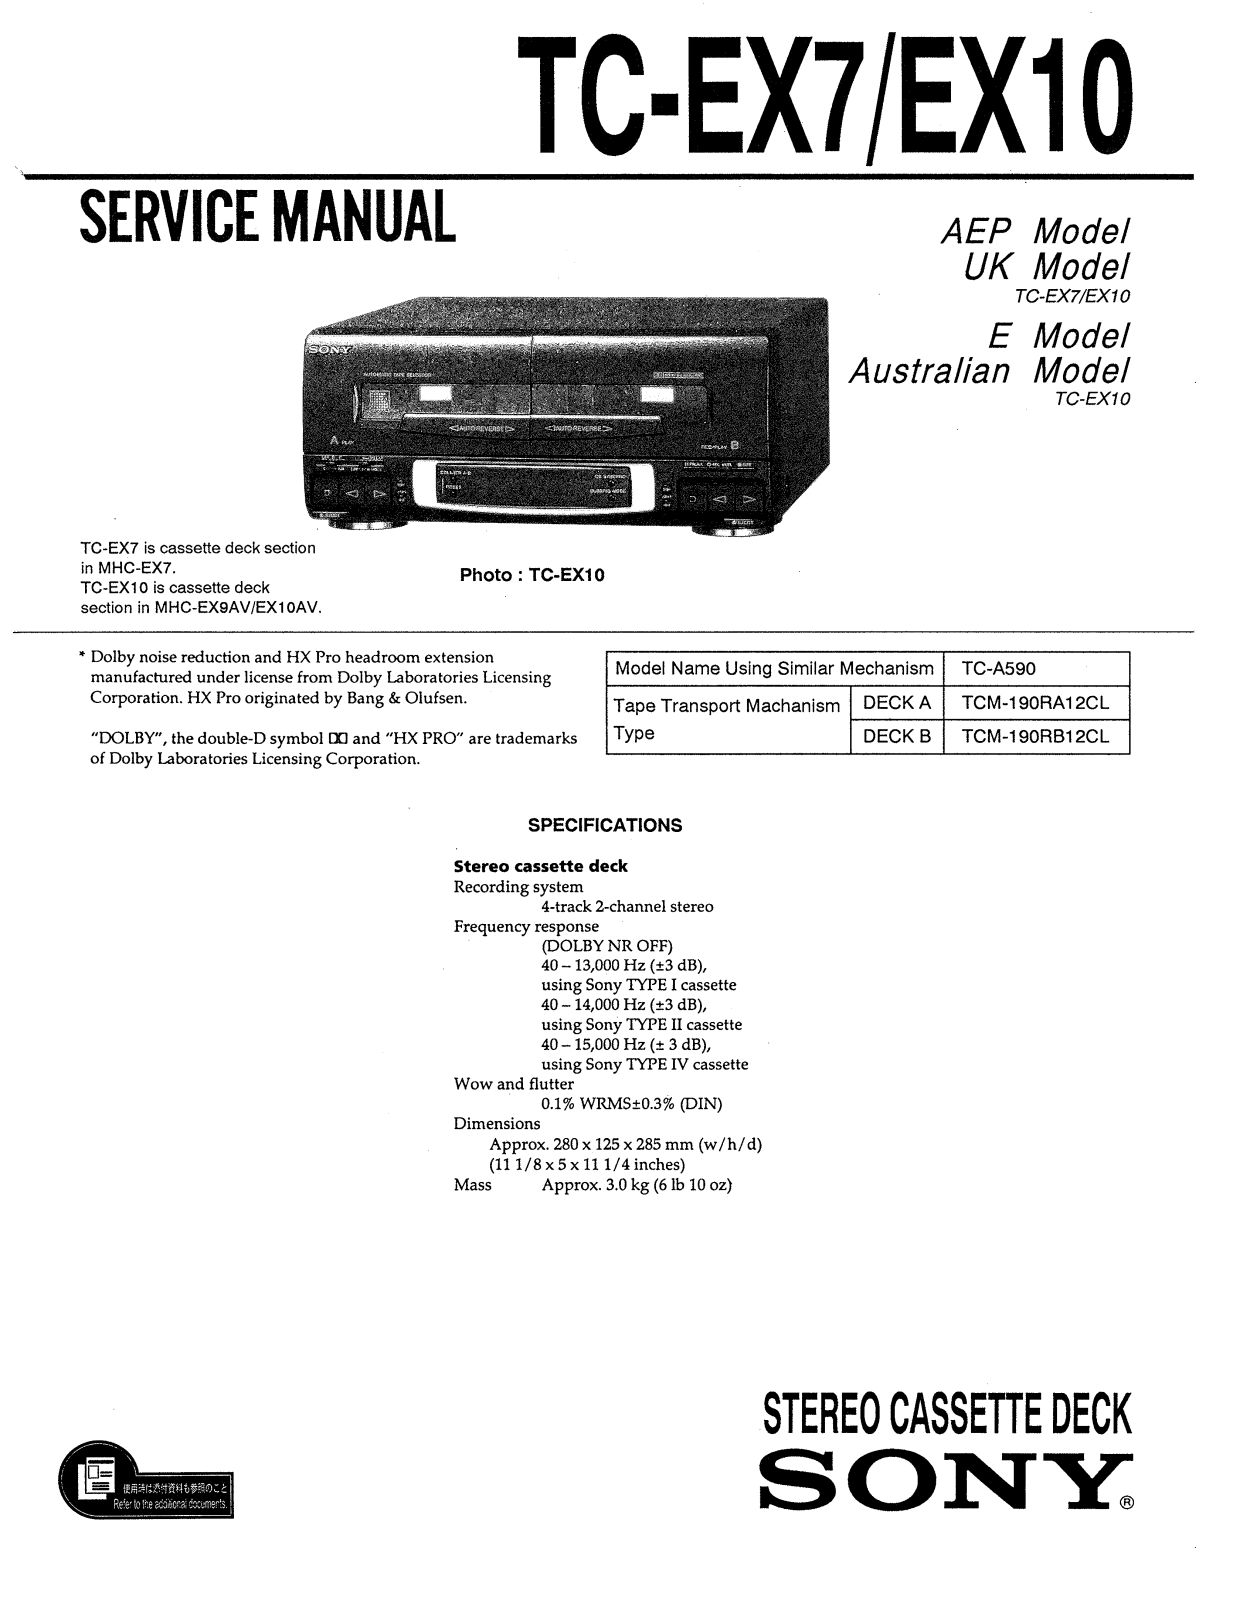 Sony TCEX-10, TCEX-7 Service manual